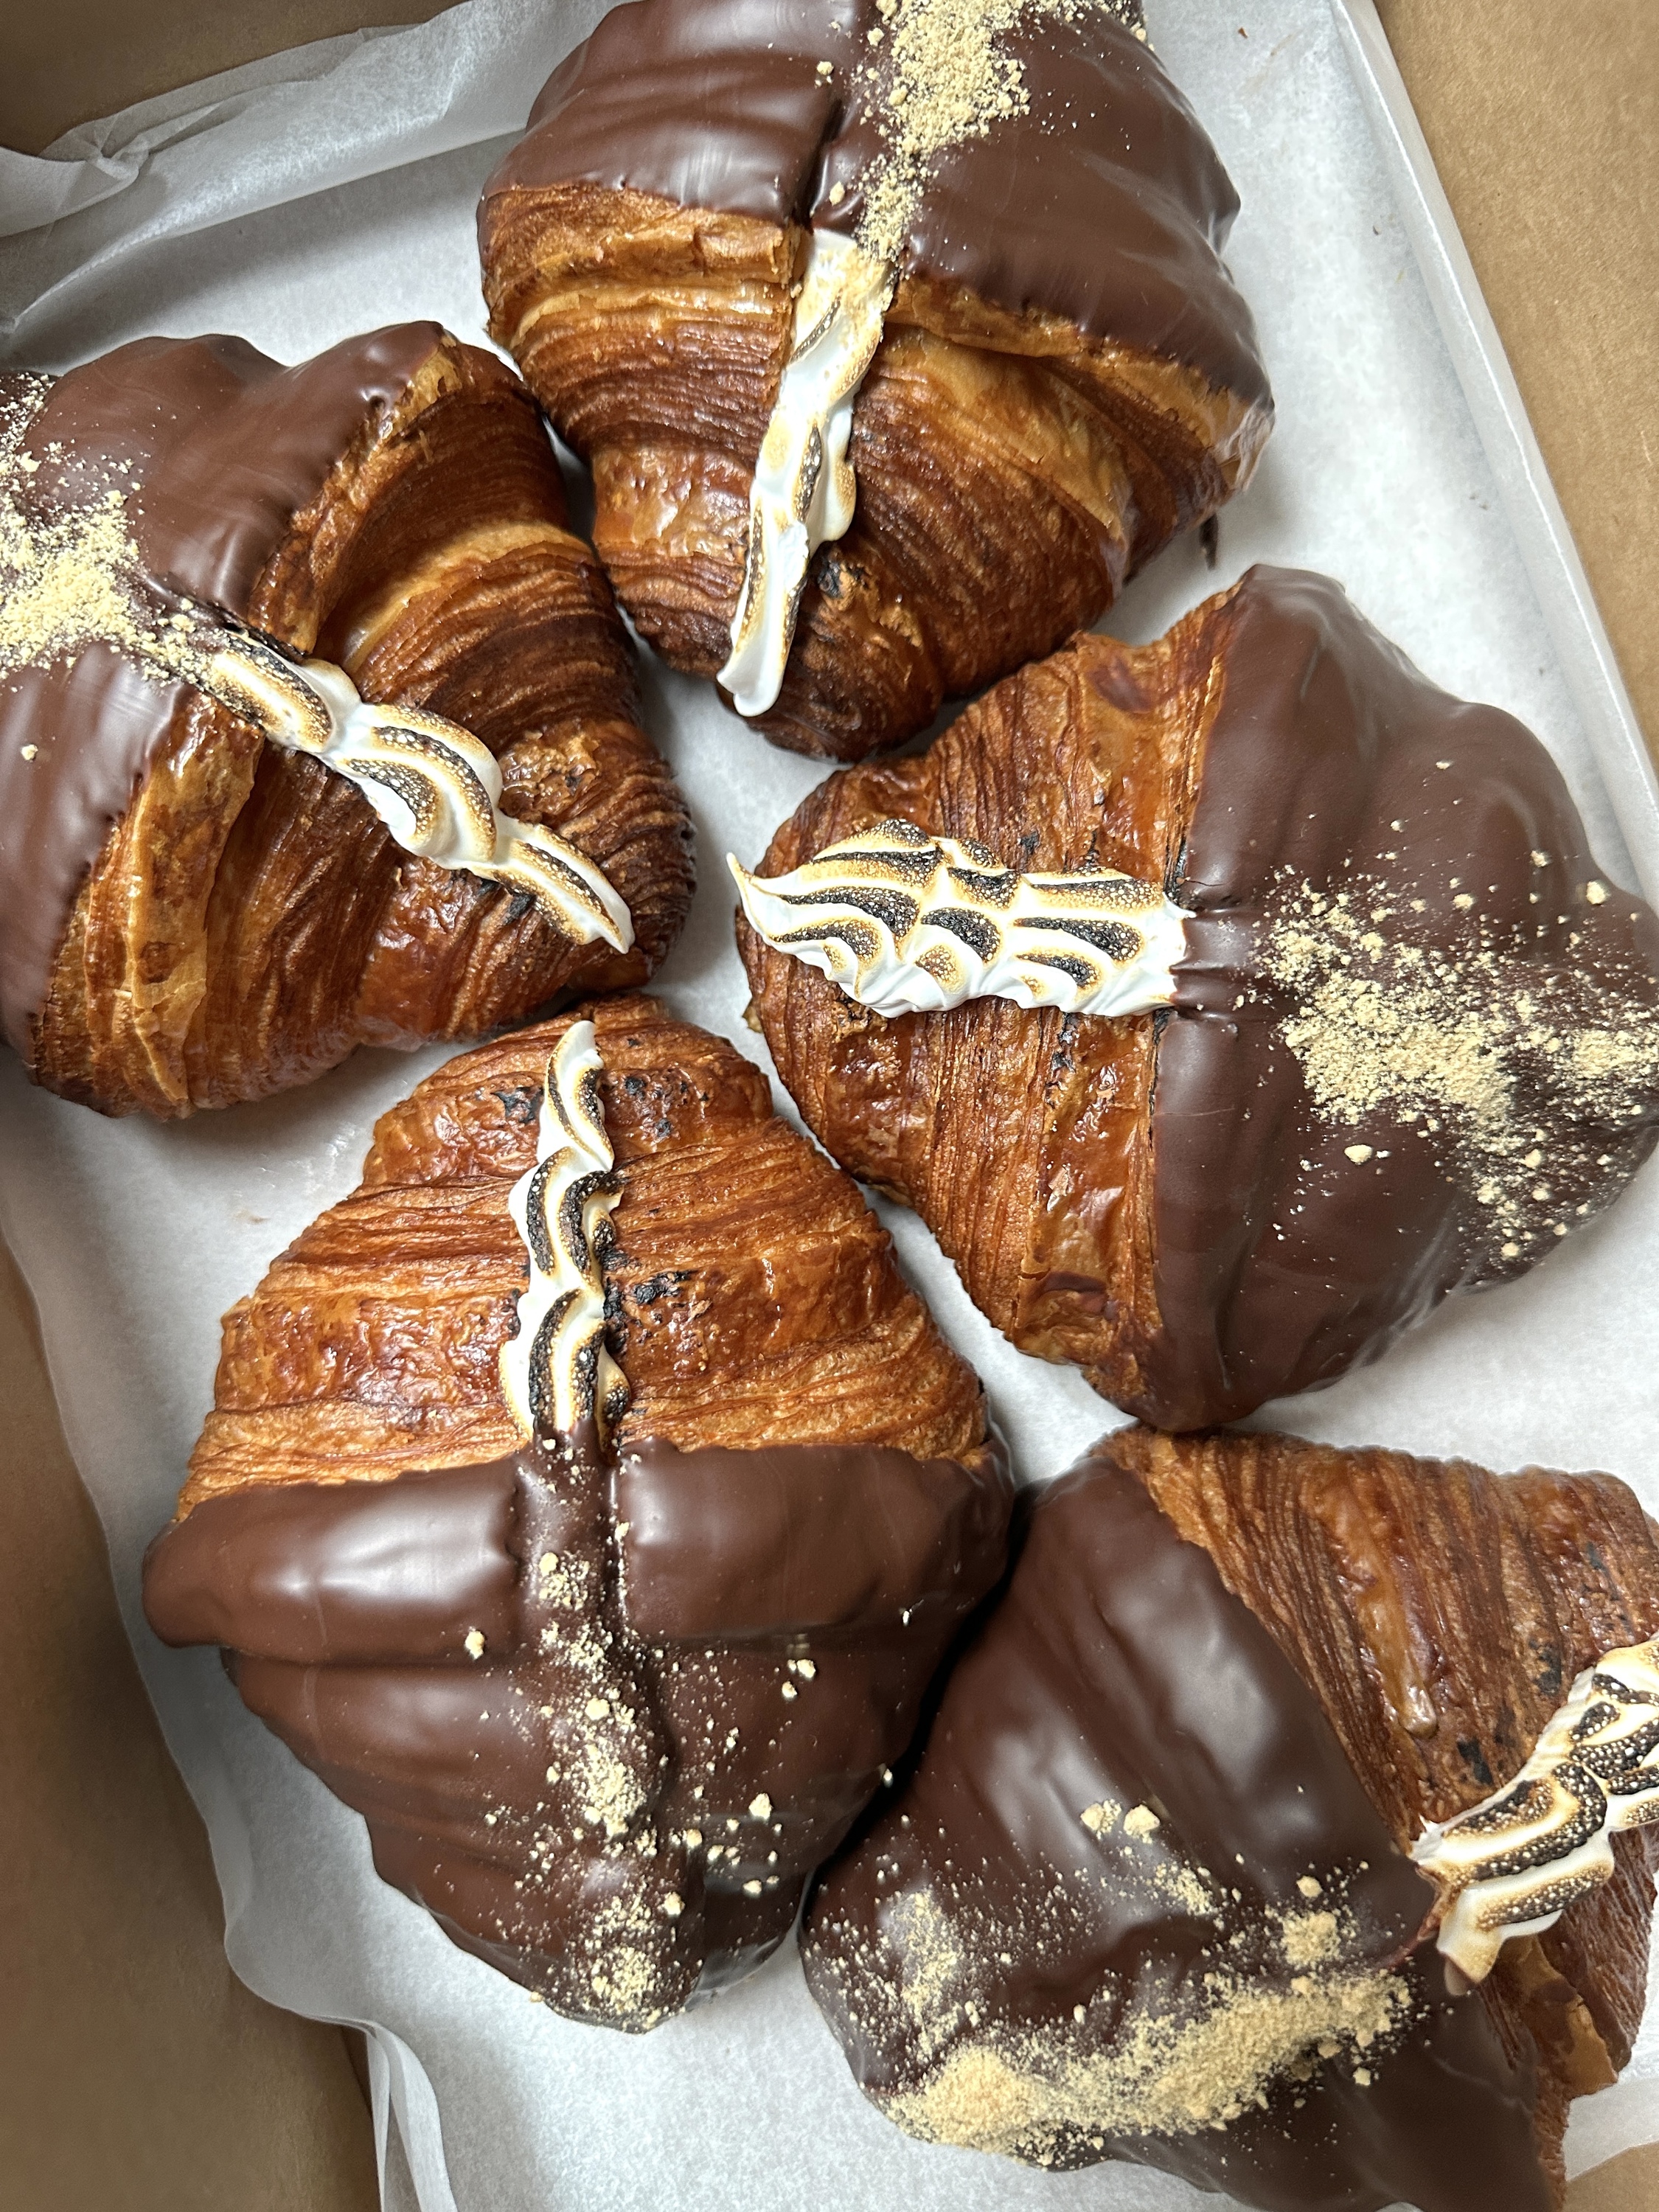 S'mores croissants at Ole & Steen